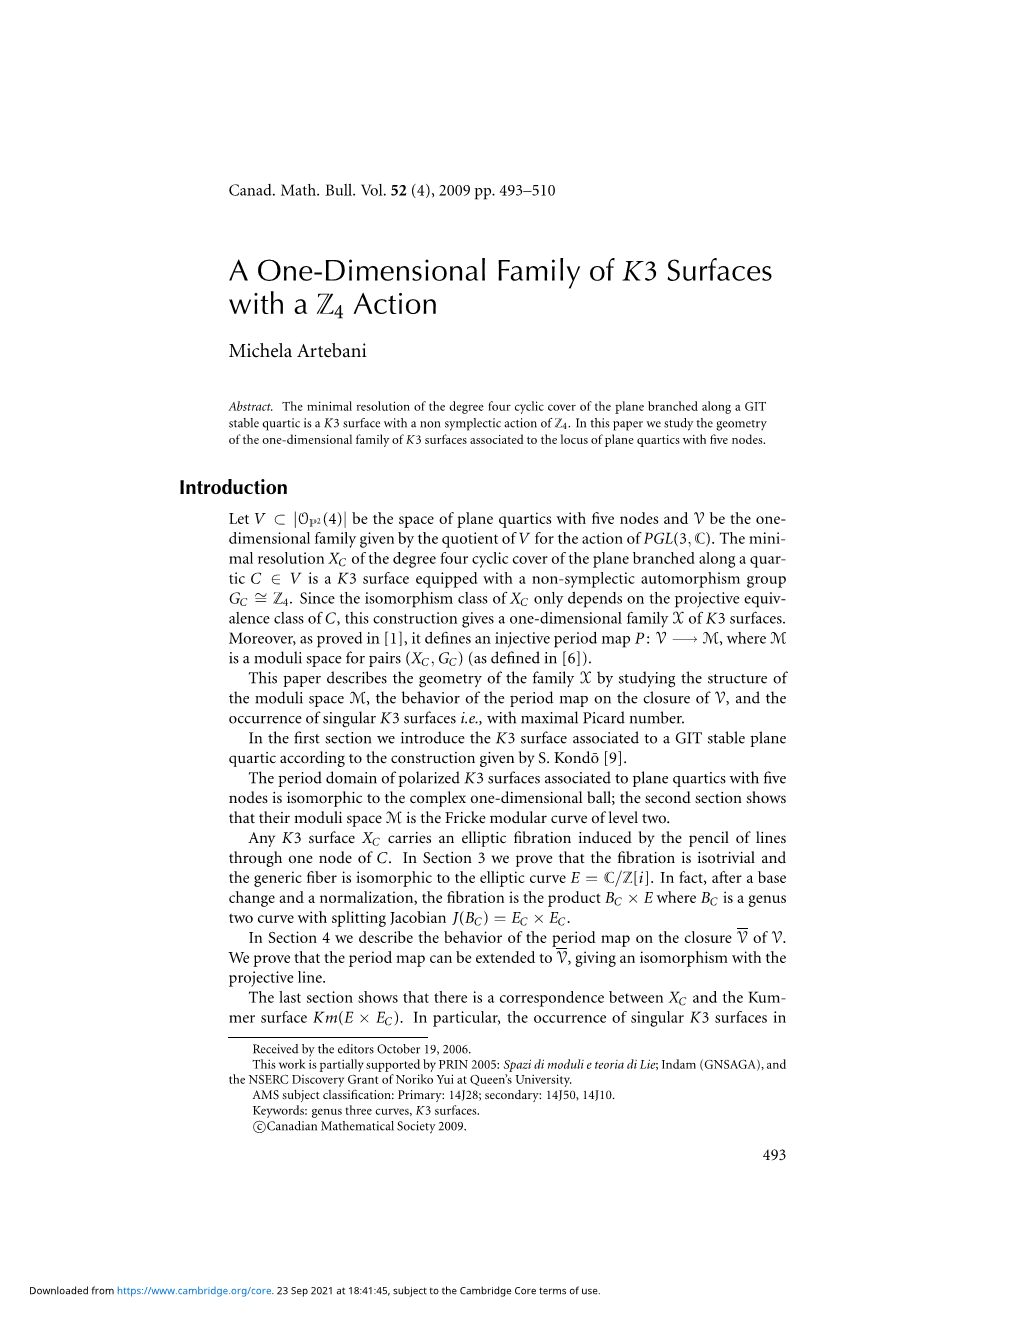 A One-Dimensional Family of K3 Surfaces with a Z4 Action Michela Artebani